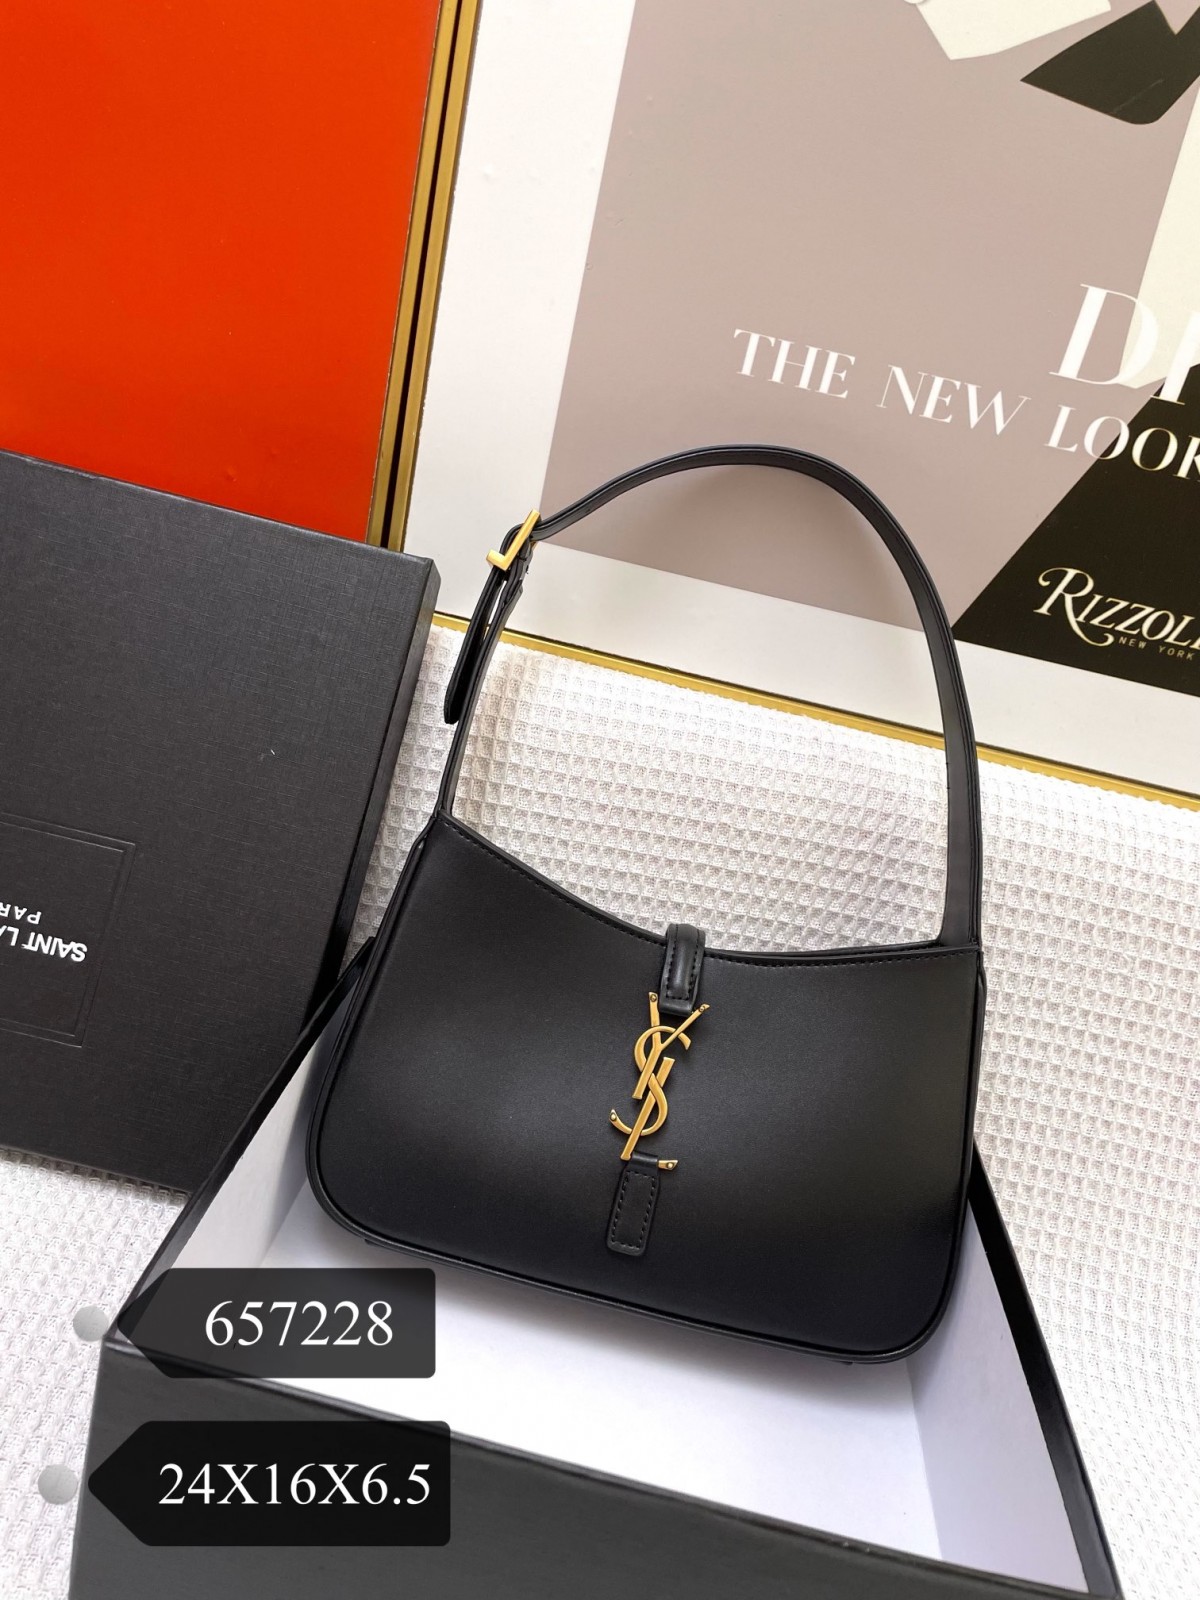 The most popular Saint Laurent LE 5 À 7 replica bags price is only $199 (2022 Special)-Best Quality Fake designer Bag Review, Replica designer bag ru